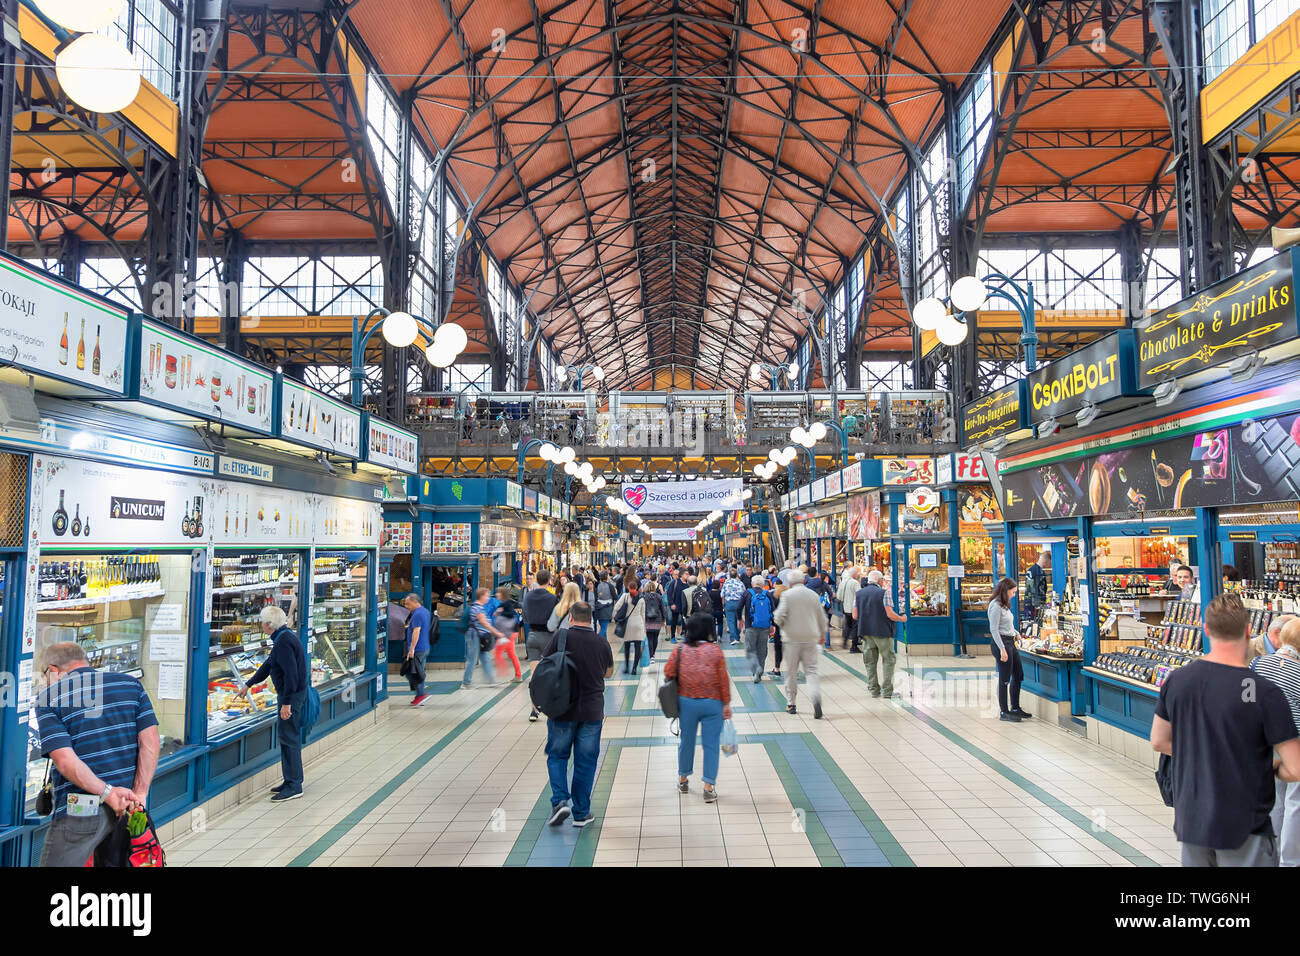 People shopping in the Great Market Hall in Budapest, Hungary. Great Market Hall is the largest indoor market in Bu Stock Photo